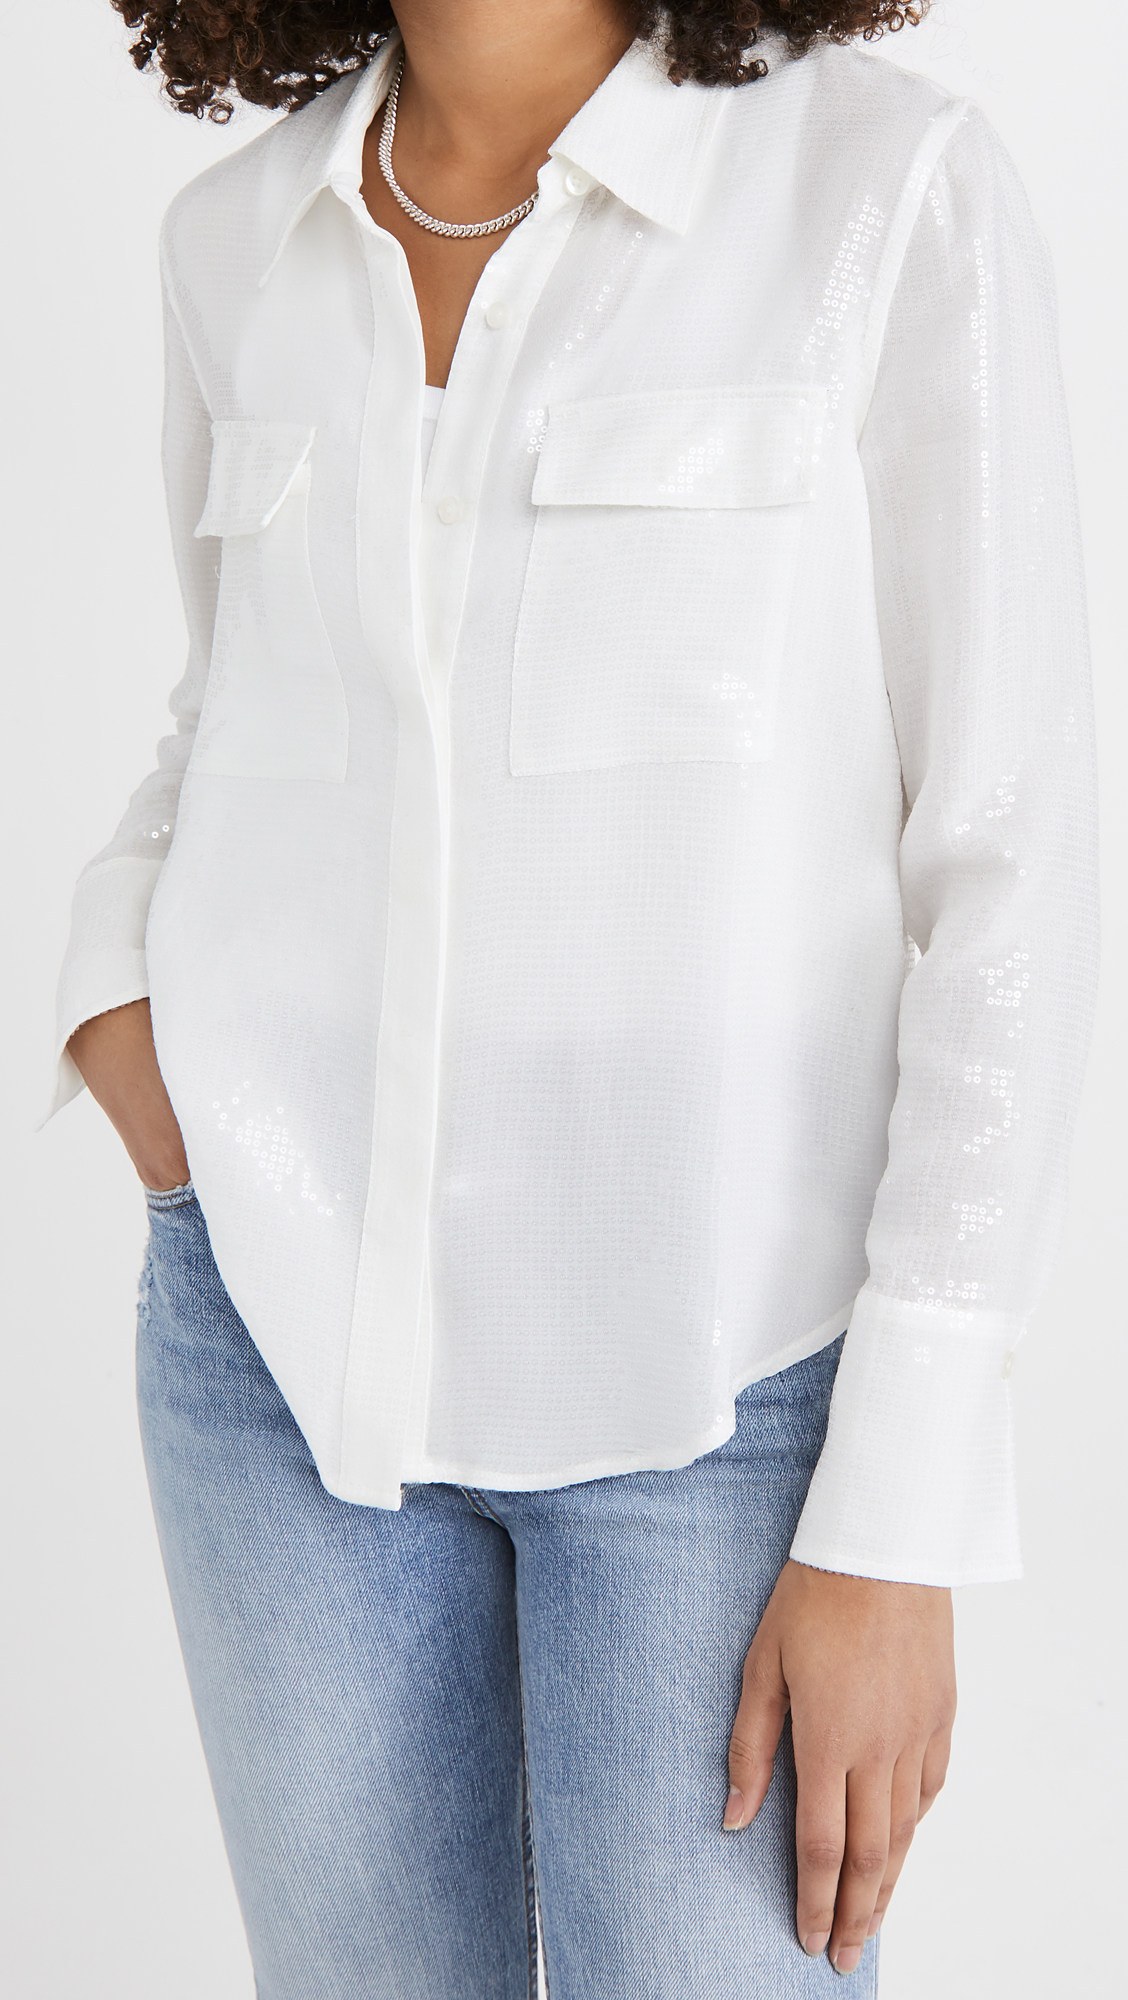 How to Style Collared Shirts the Chic ...